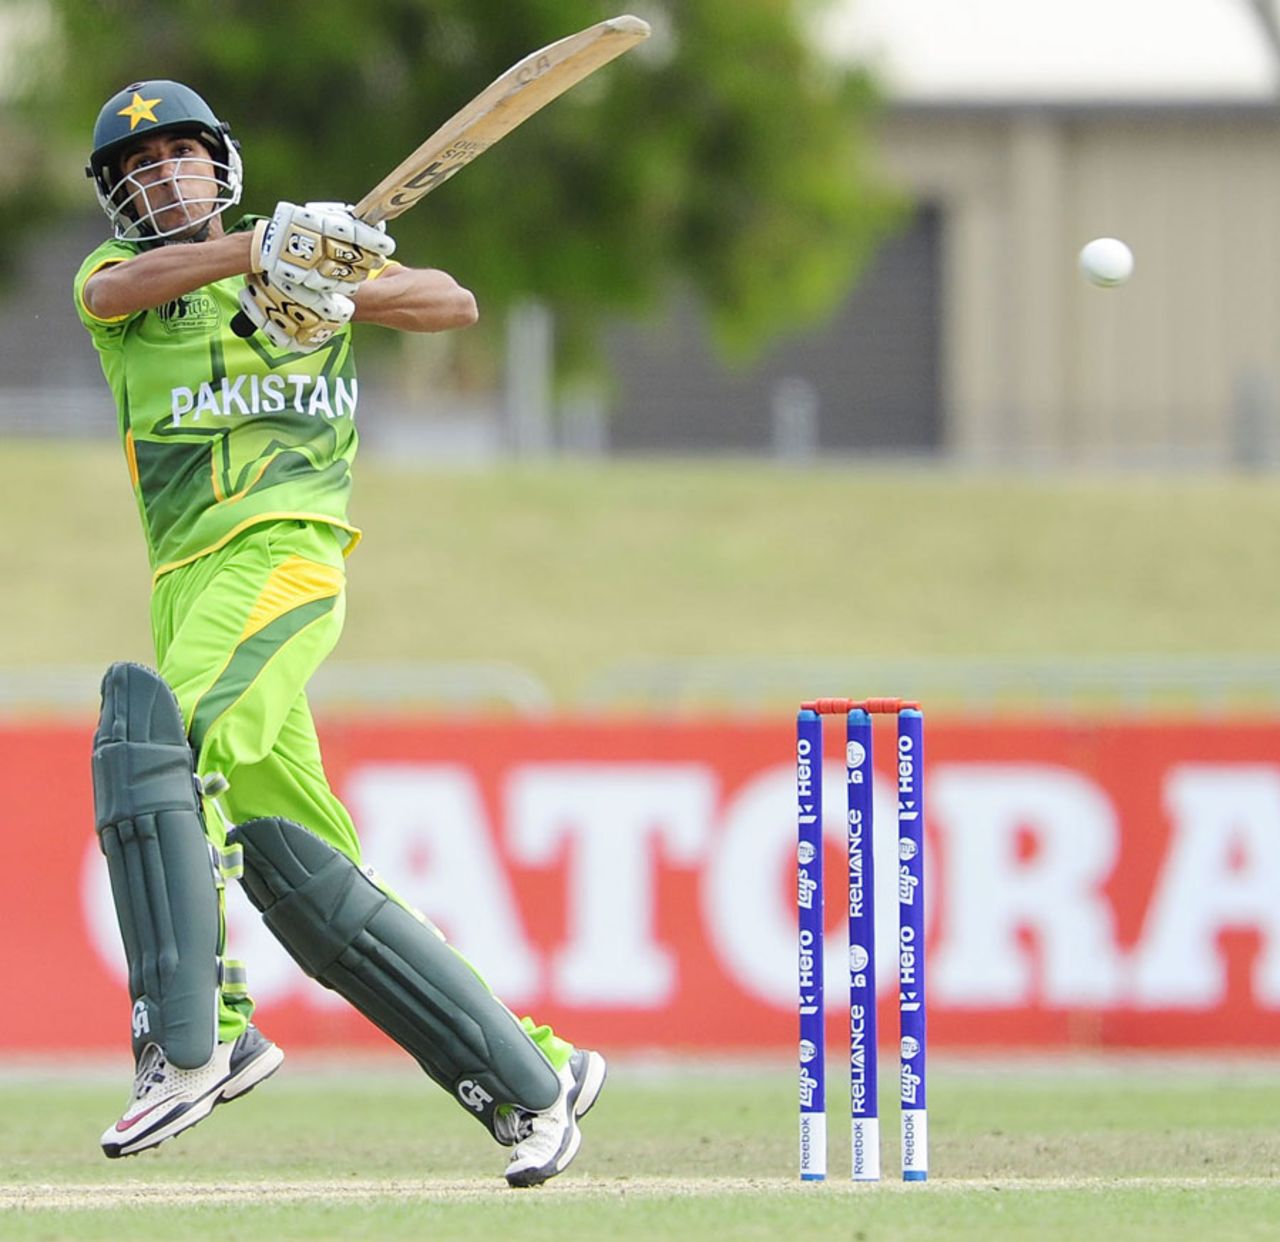 Babar Azam top-scored for Pakistan with 50, India v Pakistan, quarter-final, ICC Under-19 World Cup, Townsville, August 20, 2012